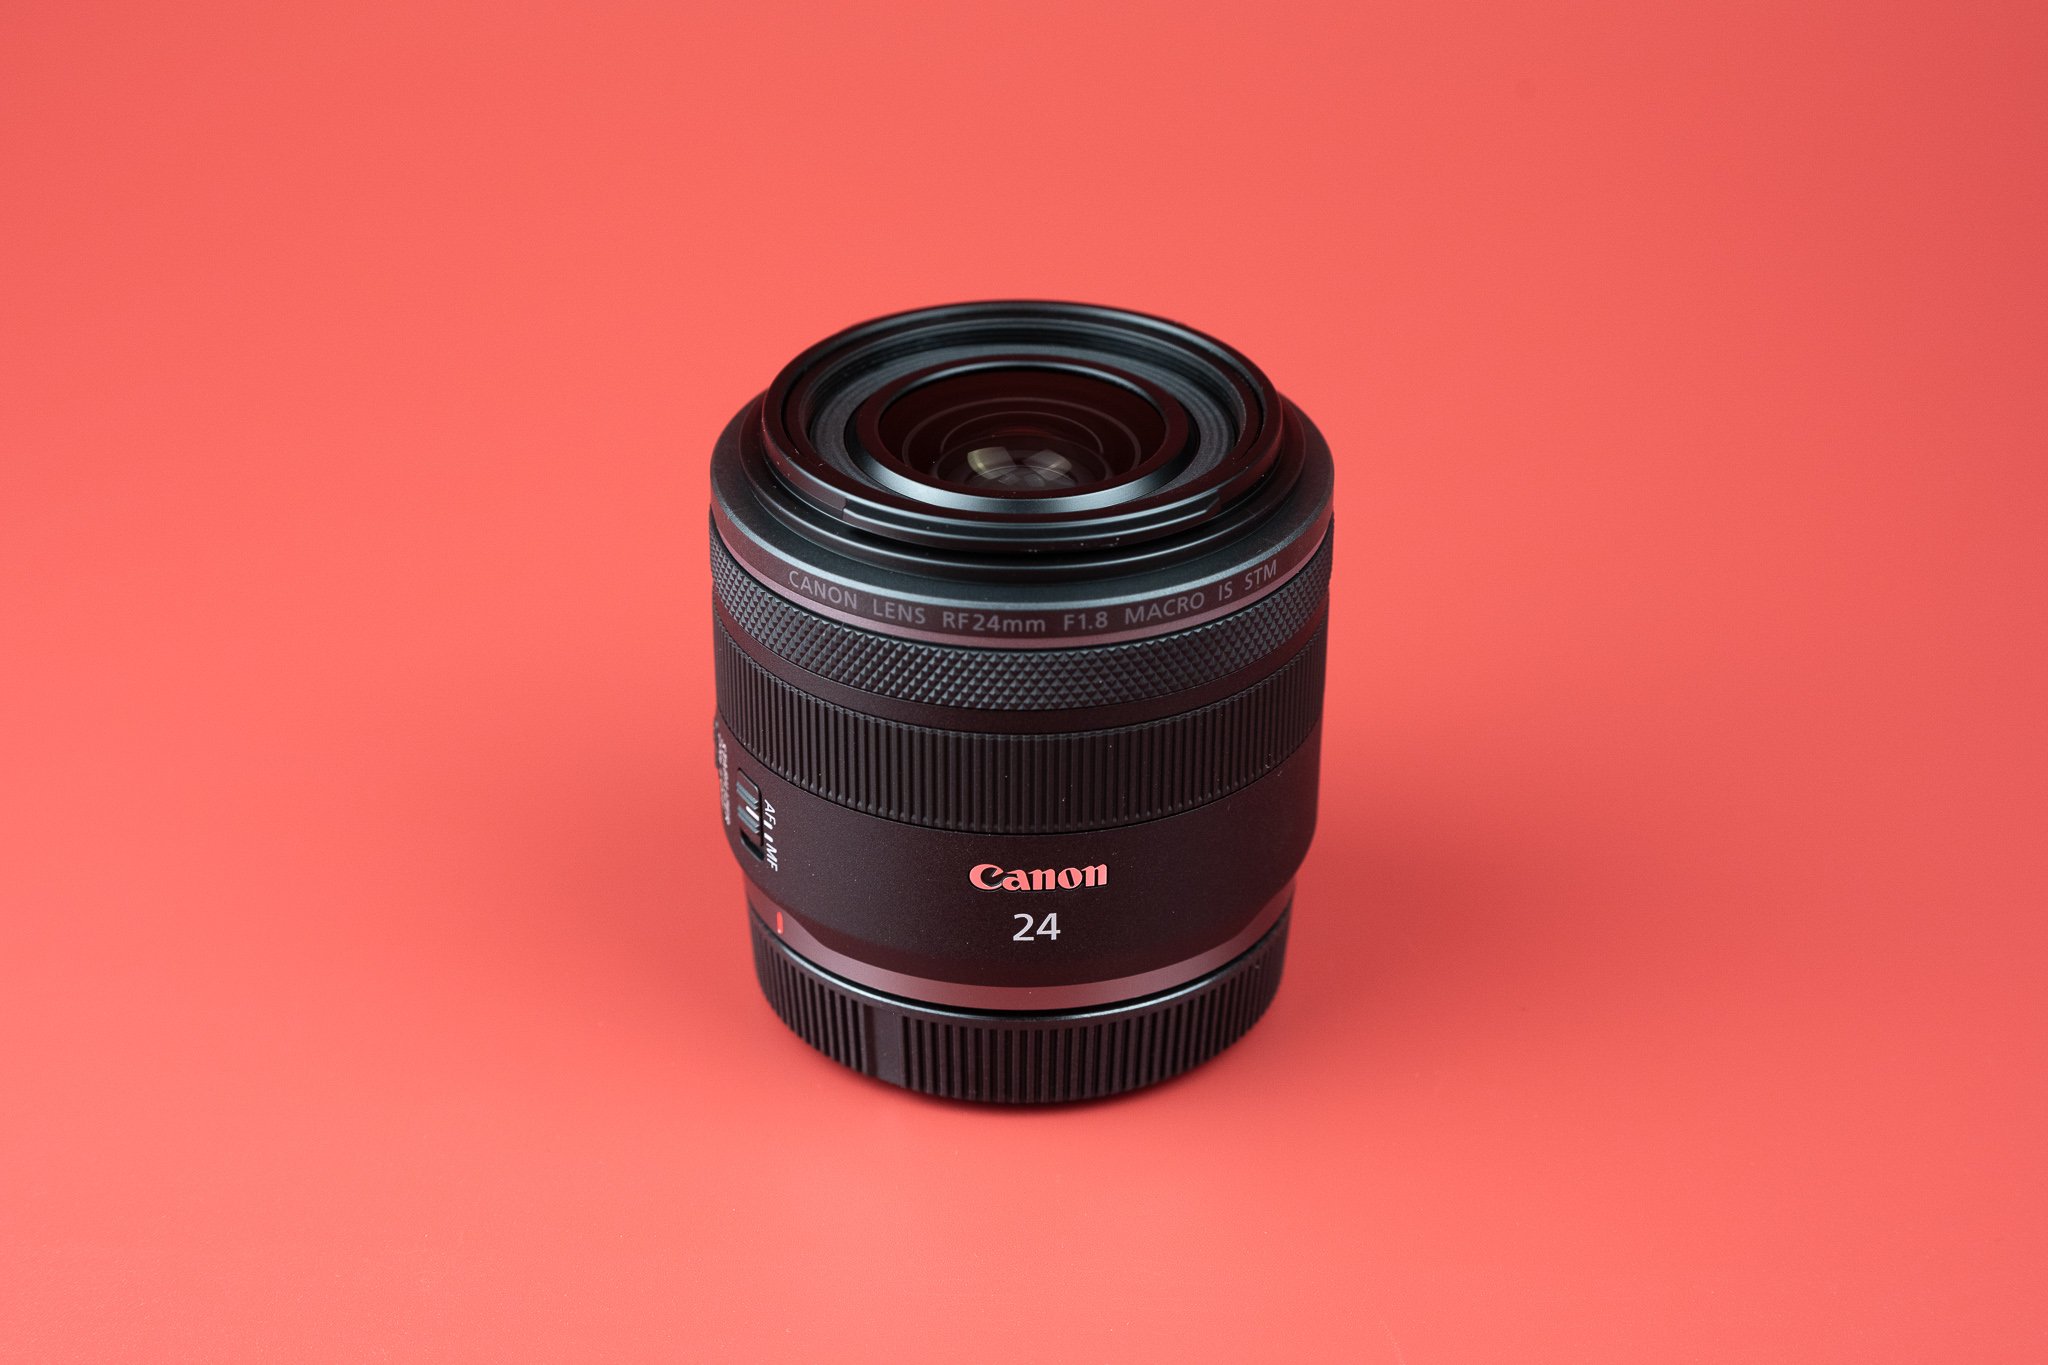 Canon RF 24mm f/1.8 Macro IS STM Review